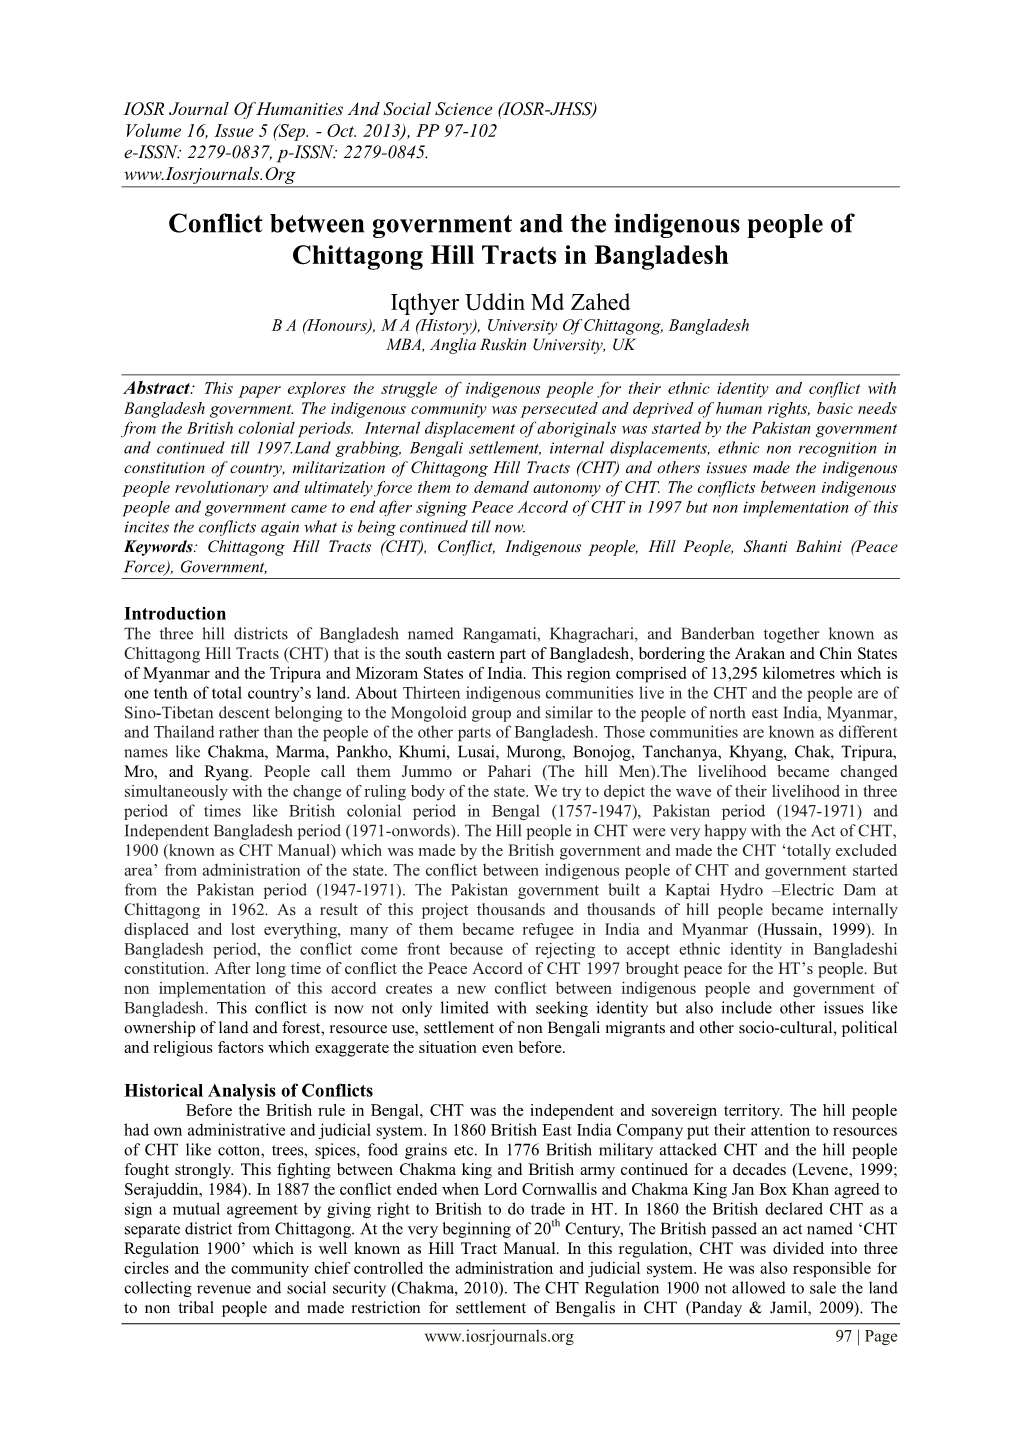 Conflict Between Government and the Indigenous People of Chittagong Hill Tracts in Bangladesh